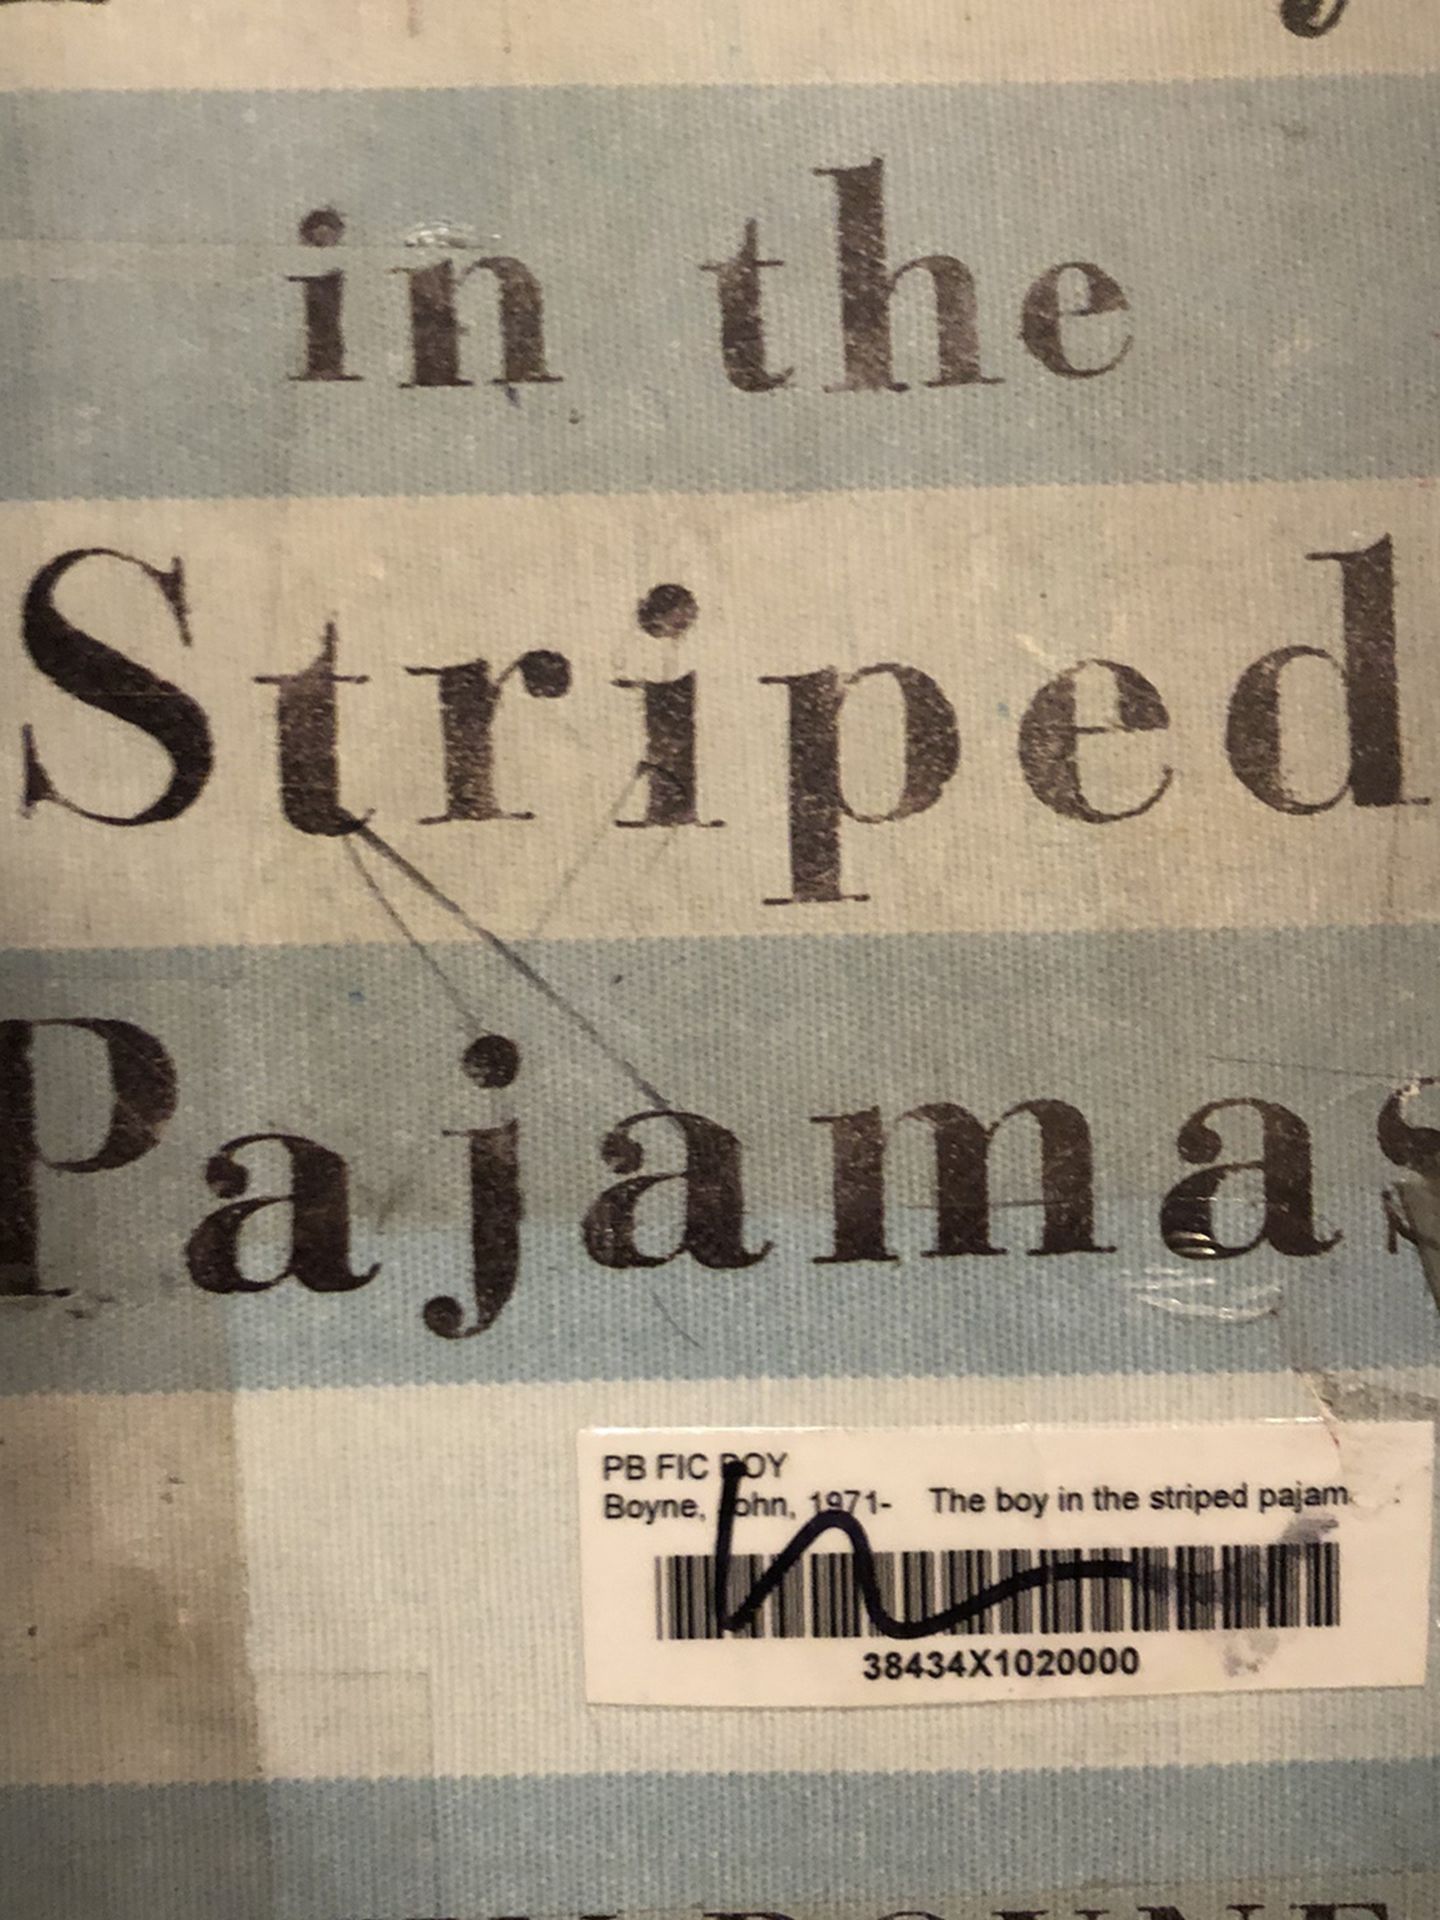 The Boy In The Striped Pajama